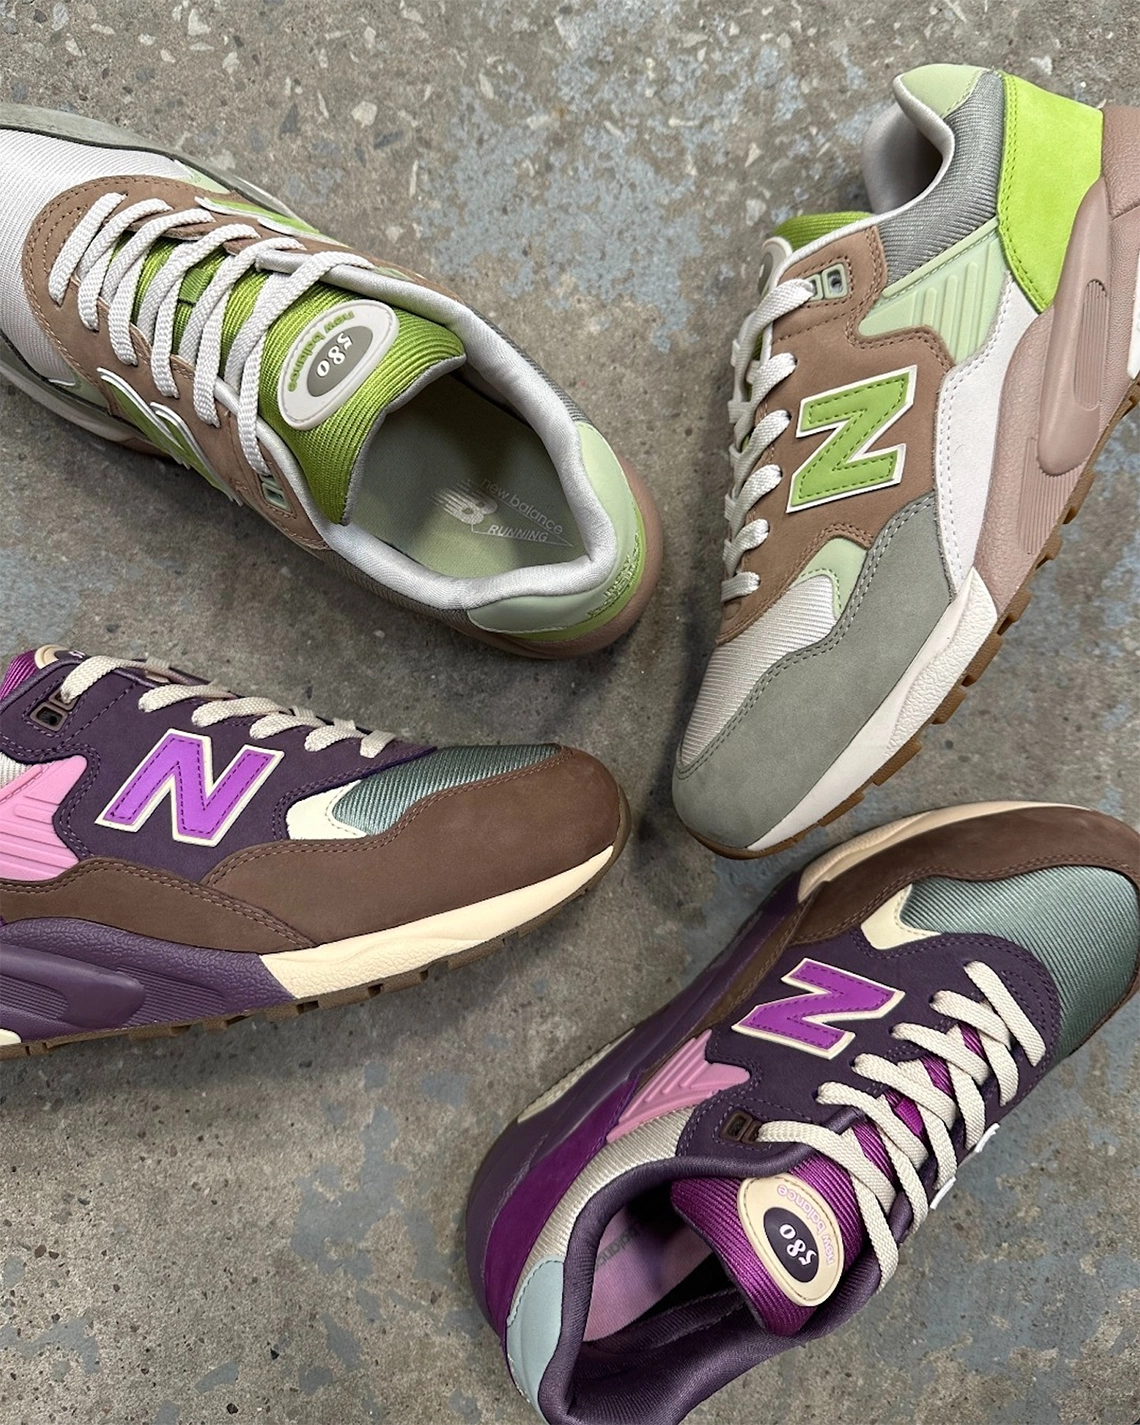 “Size? Unveils Exclusive New Balance 580 Collection”